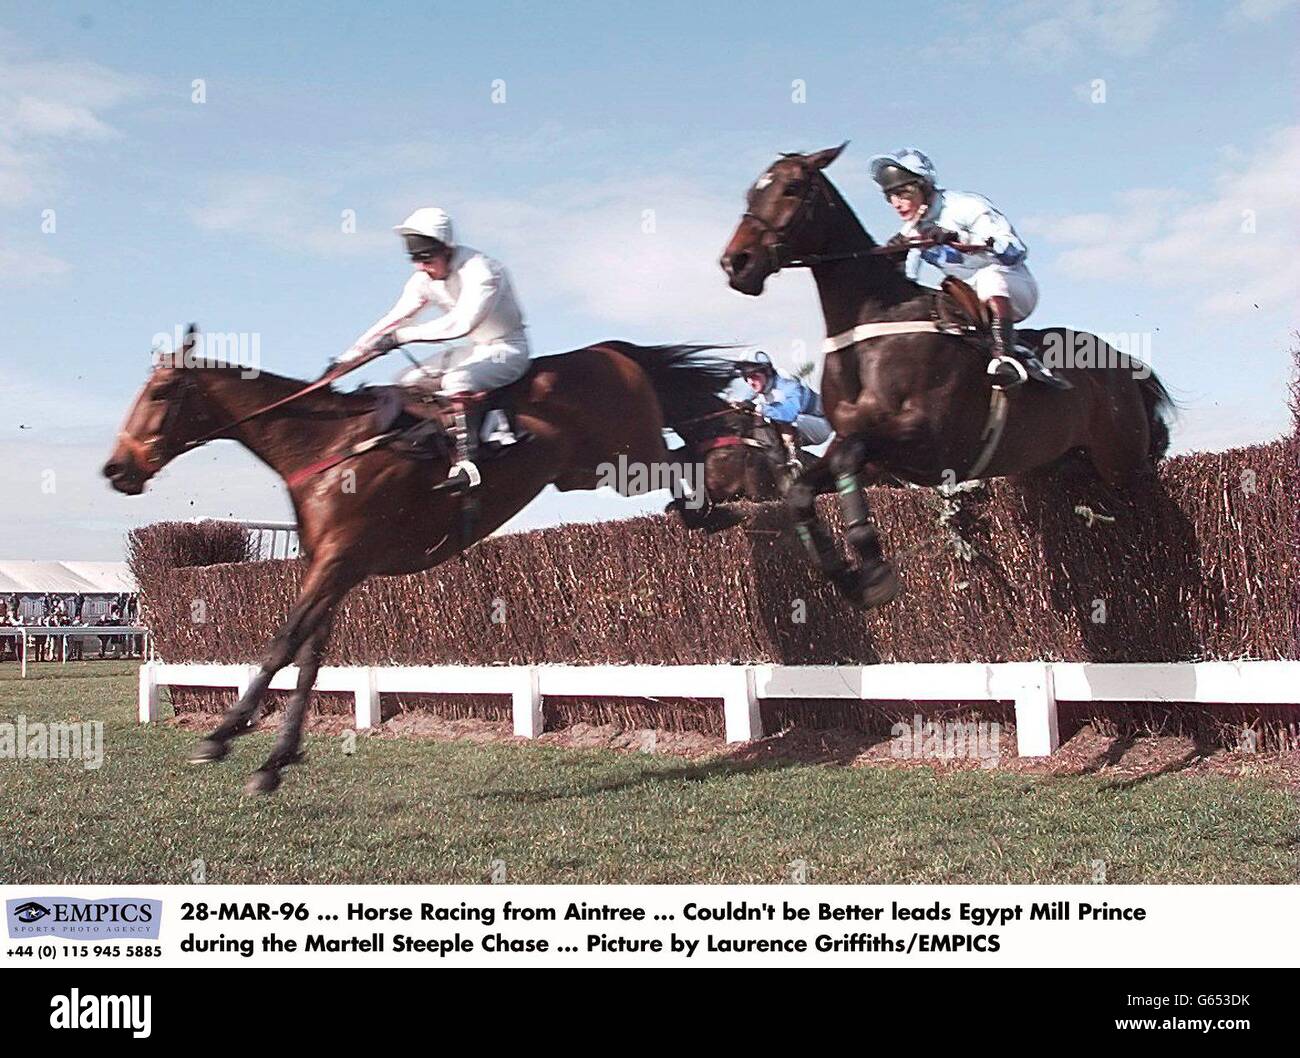 Horse Racing- Aintree. Couldn't Be Better leads Egypt Mill Prince during the Martell Steeple Chase Stock Photo